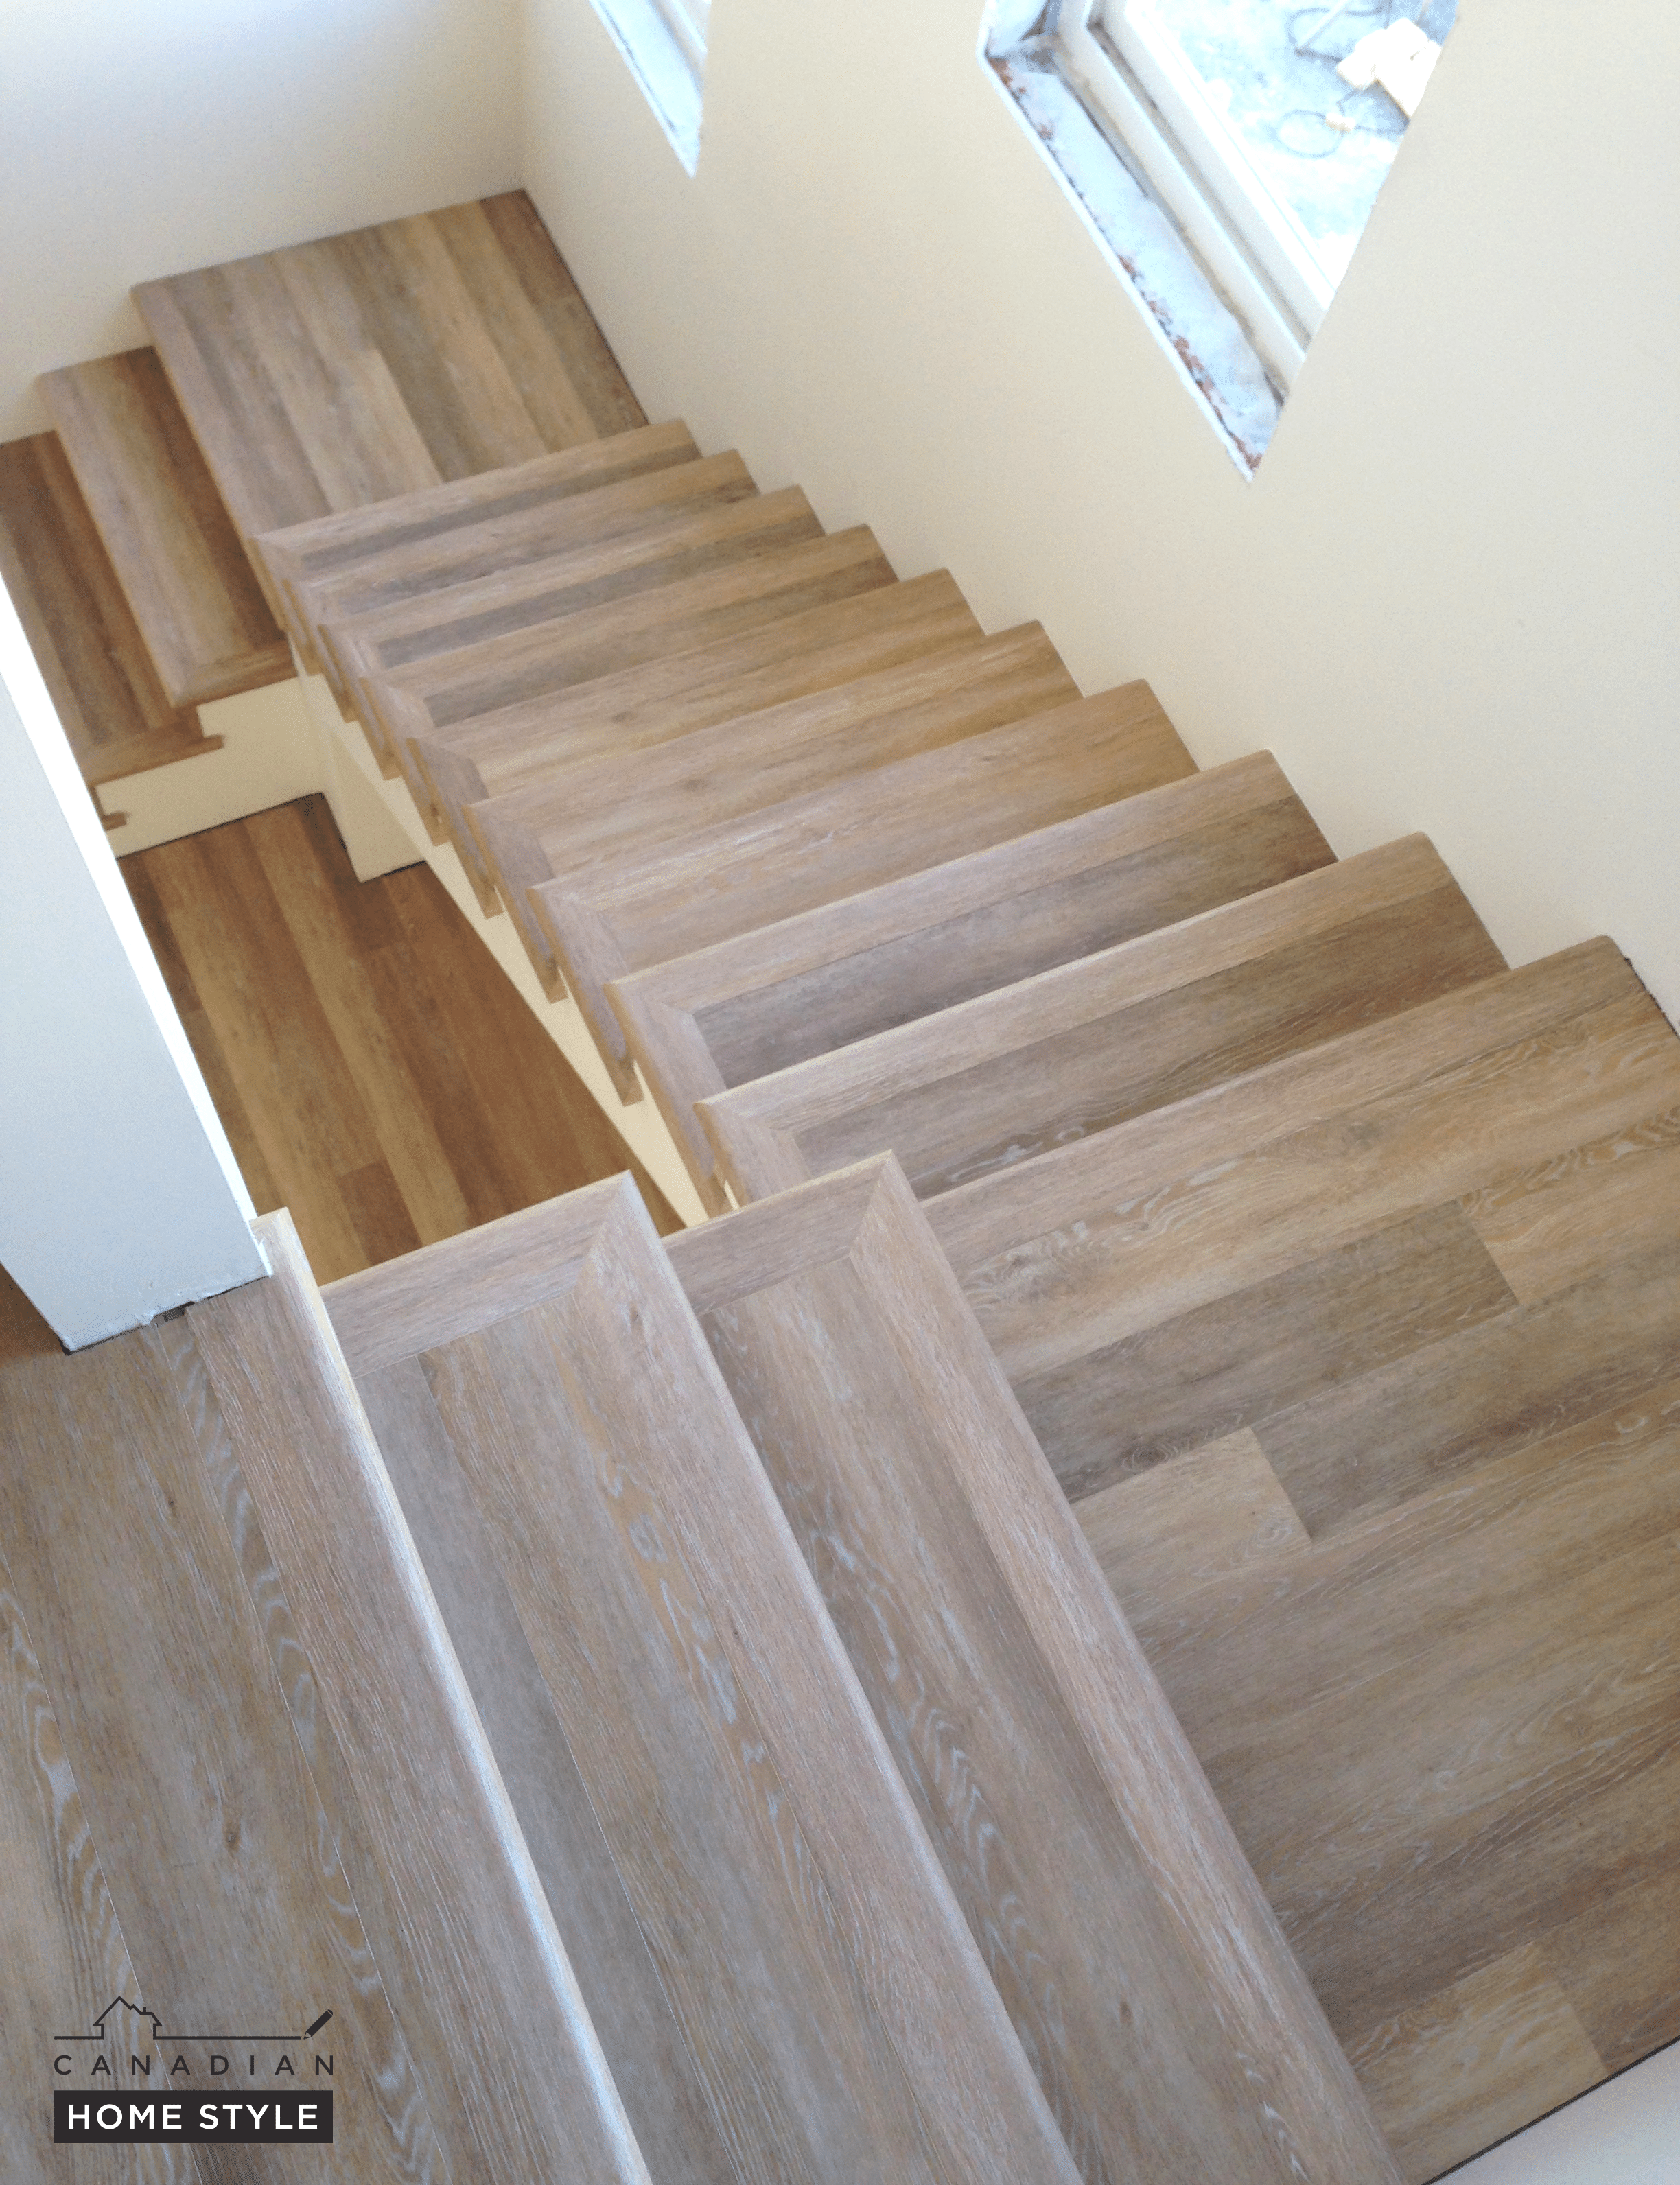 A stairway with wood flooring and a vinyl window.